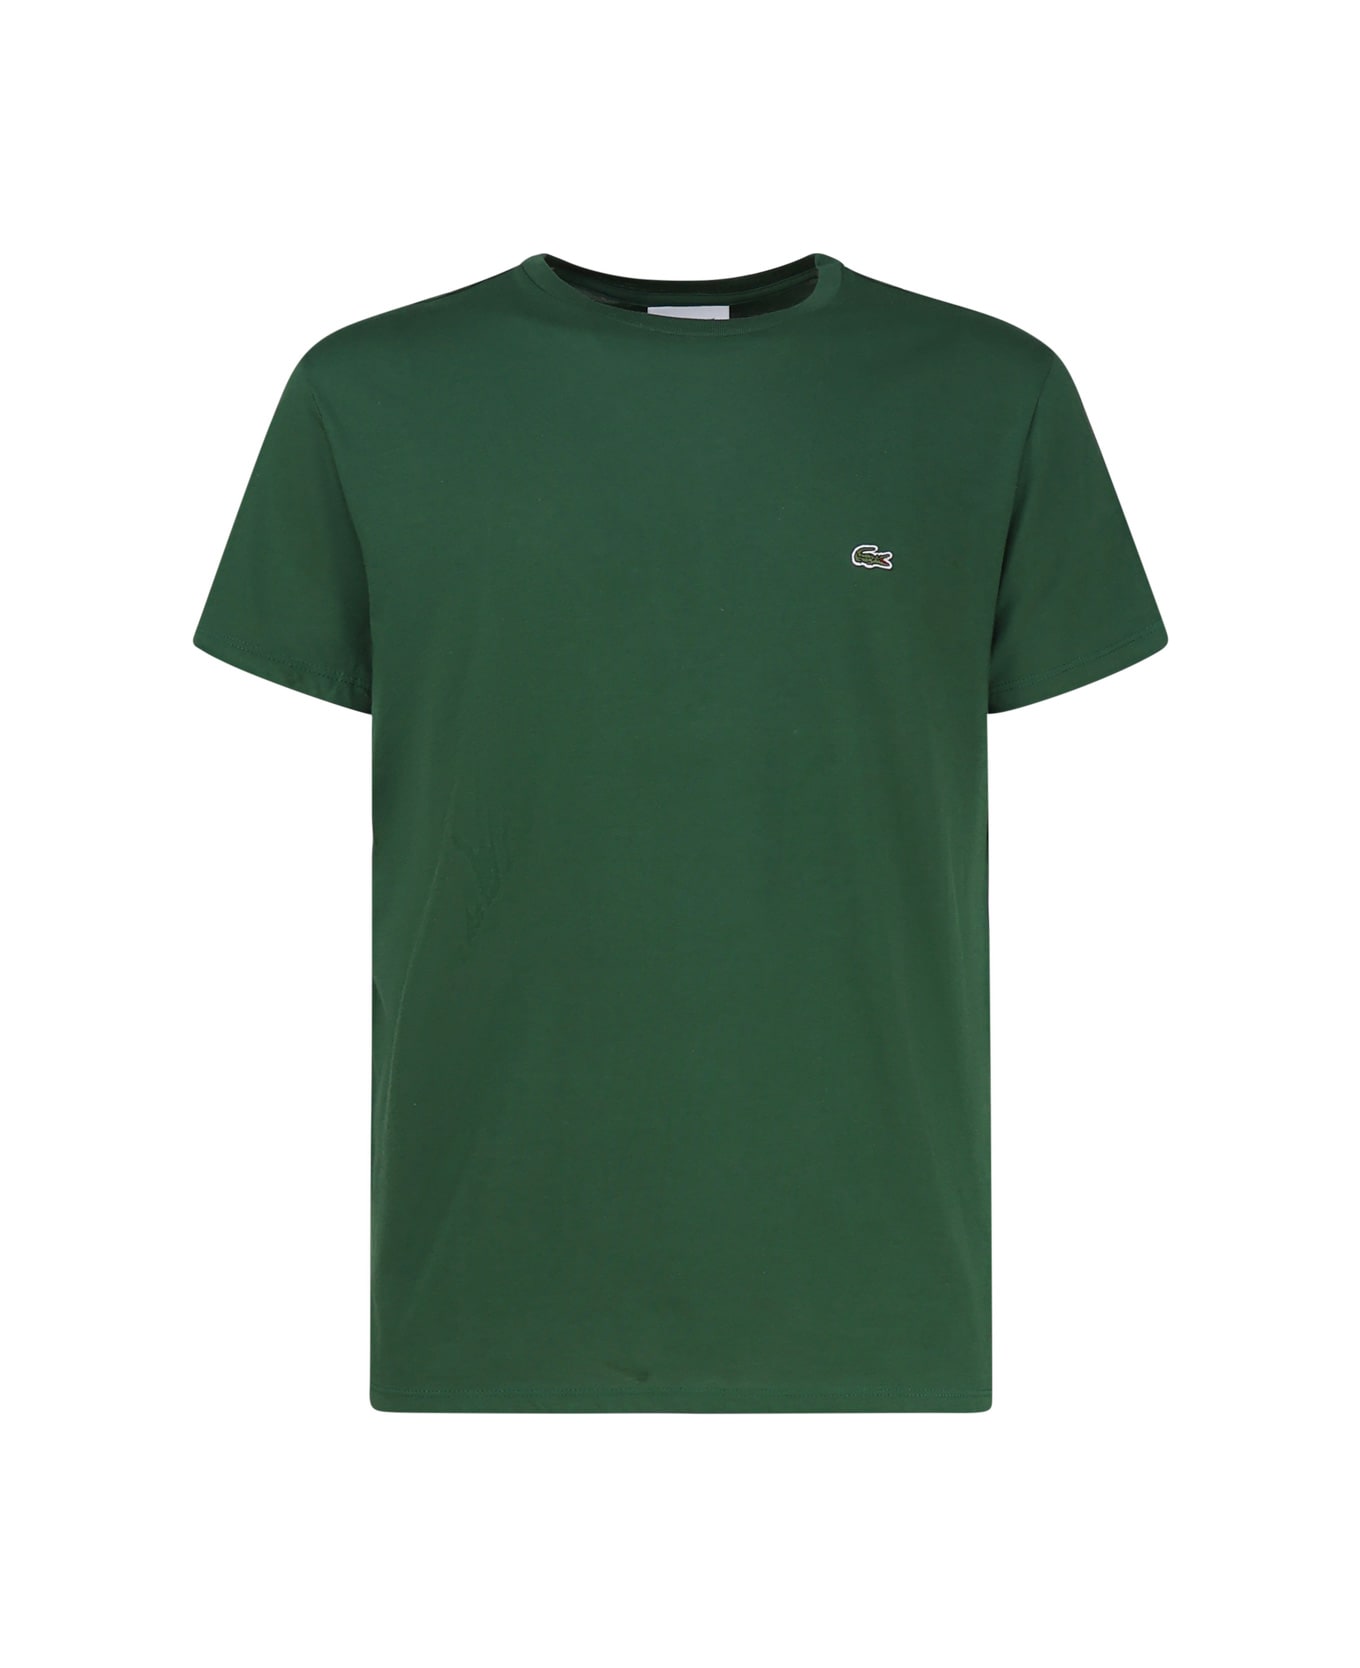 Lacoste Green T-shirt In Cotton Jersey Lacoste シャツ